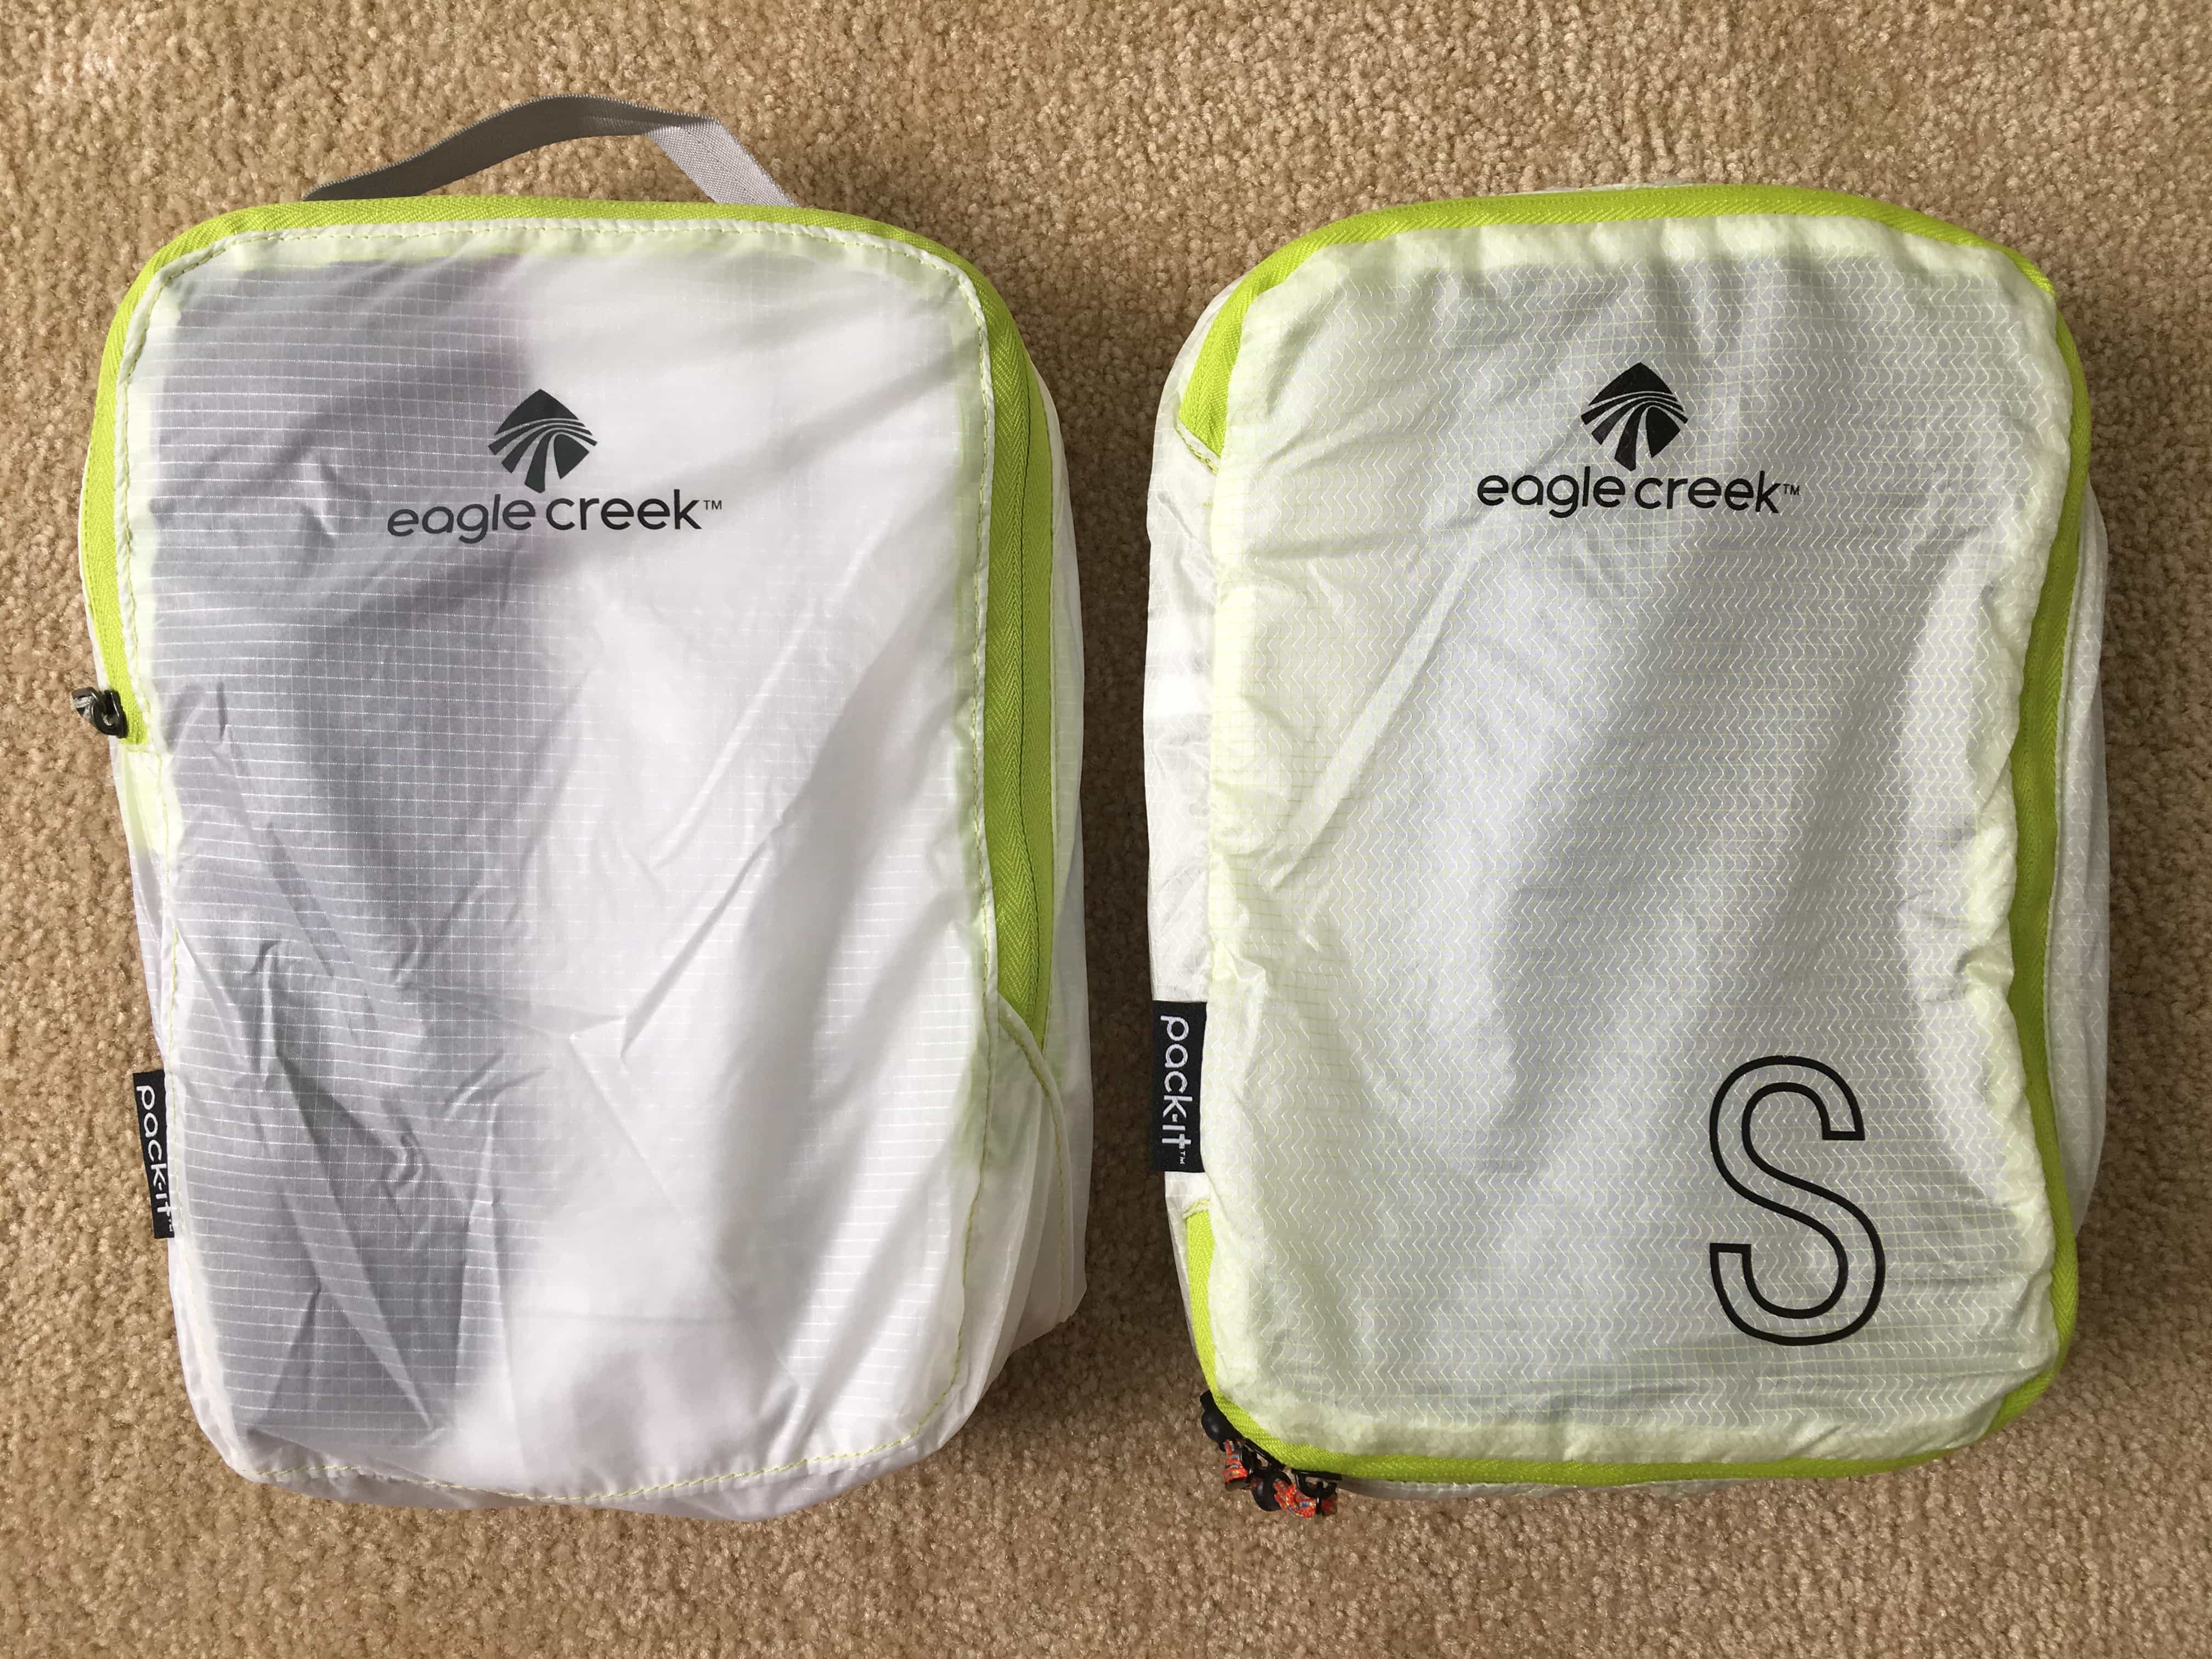 Eagle Creek Pack-It Specter Cube (left) and Specter Tech Cube (right)